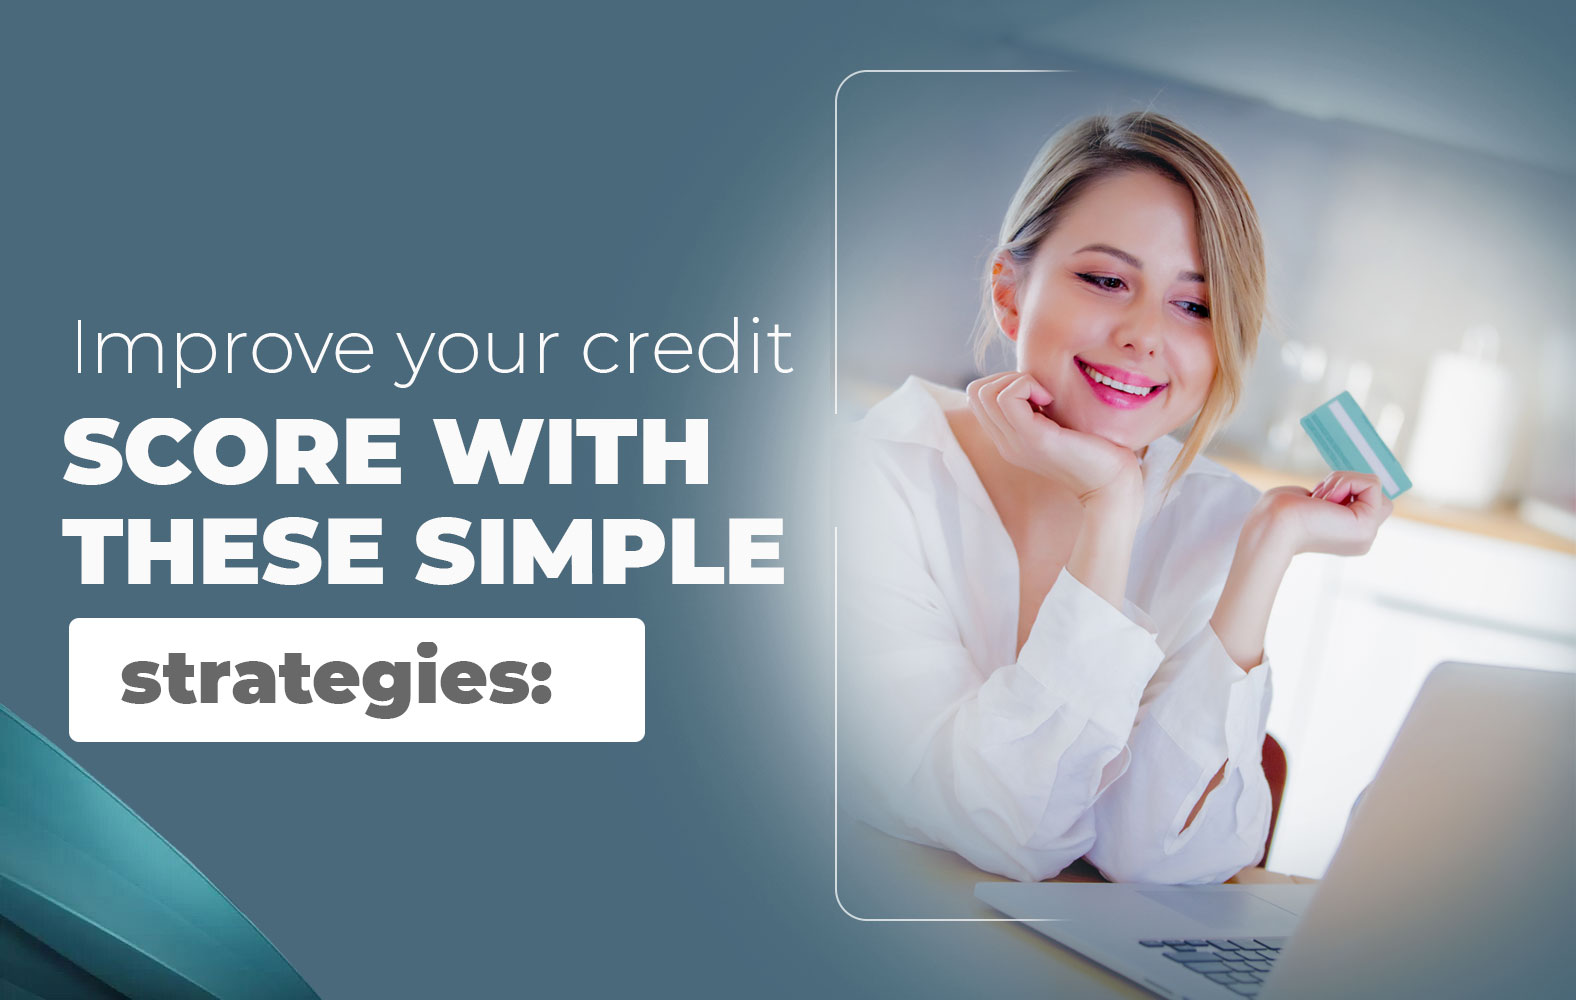 Improve your credit score with these simple strategies: